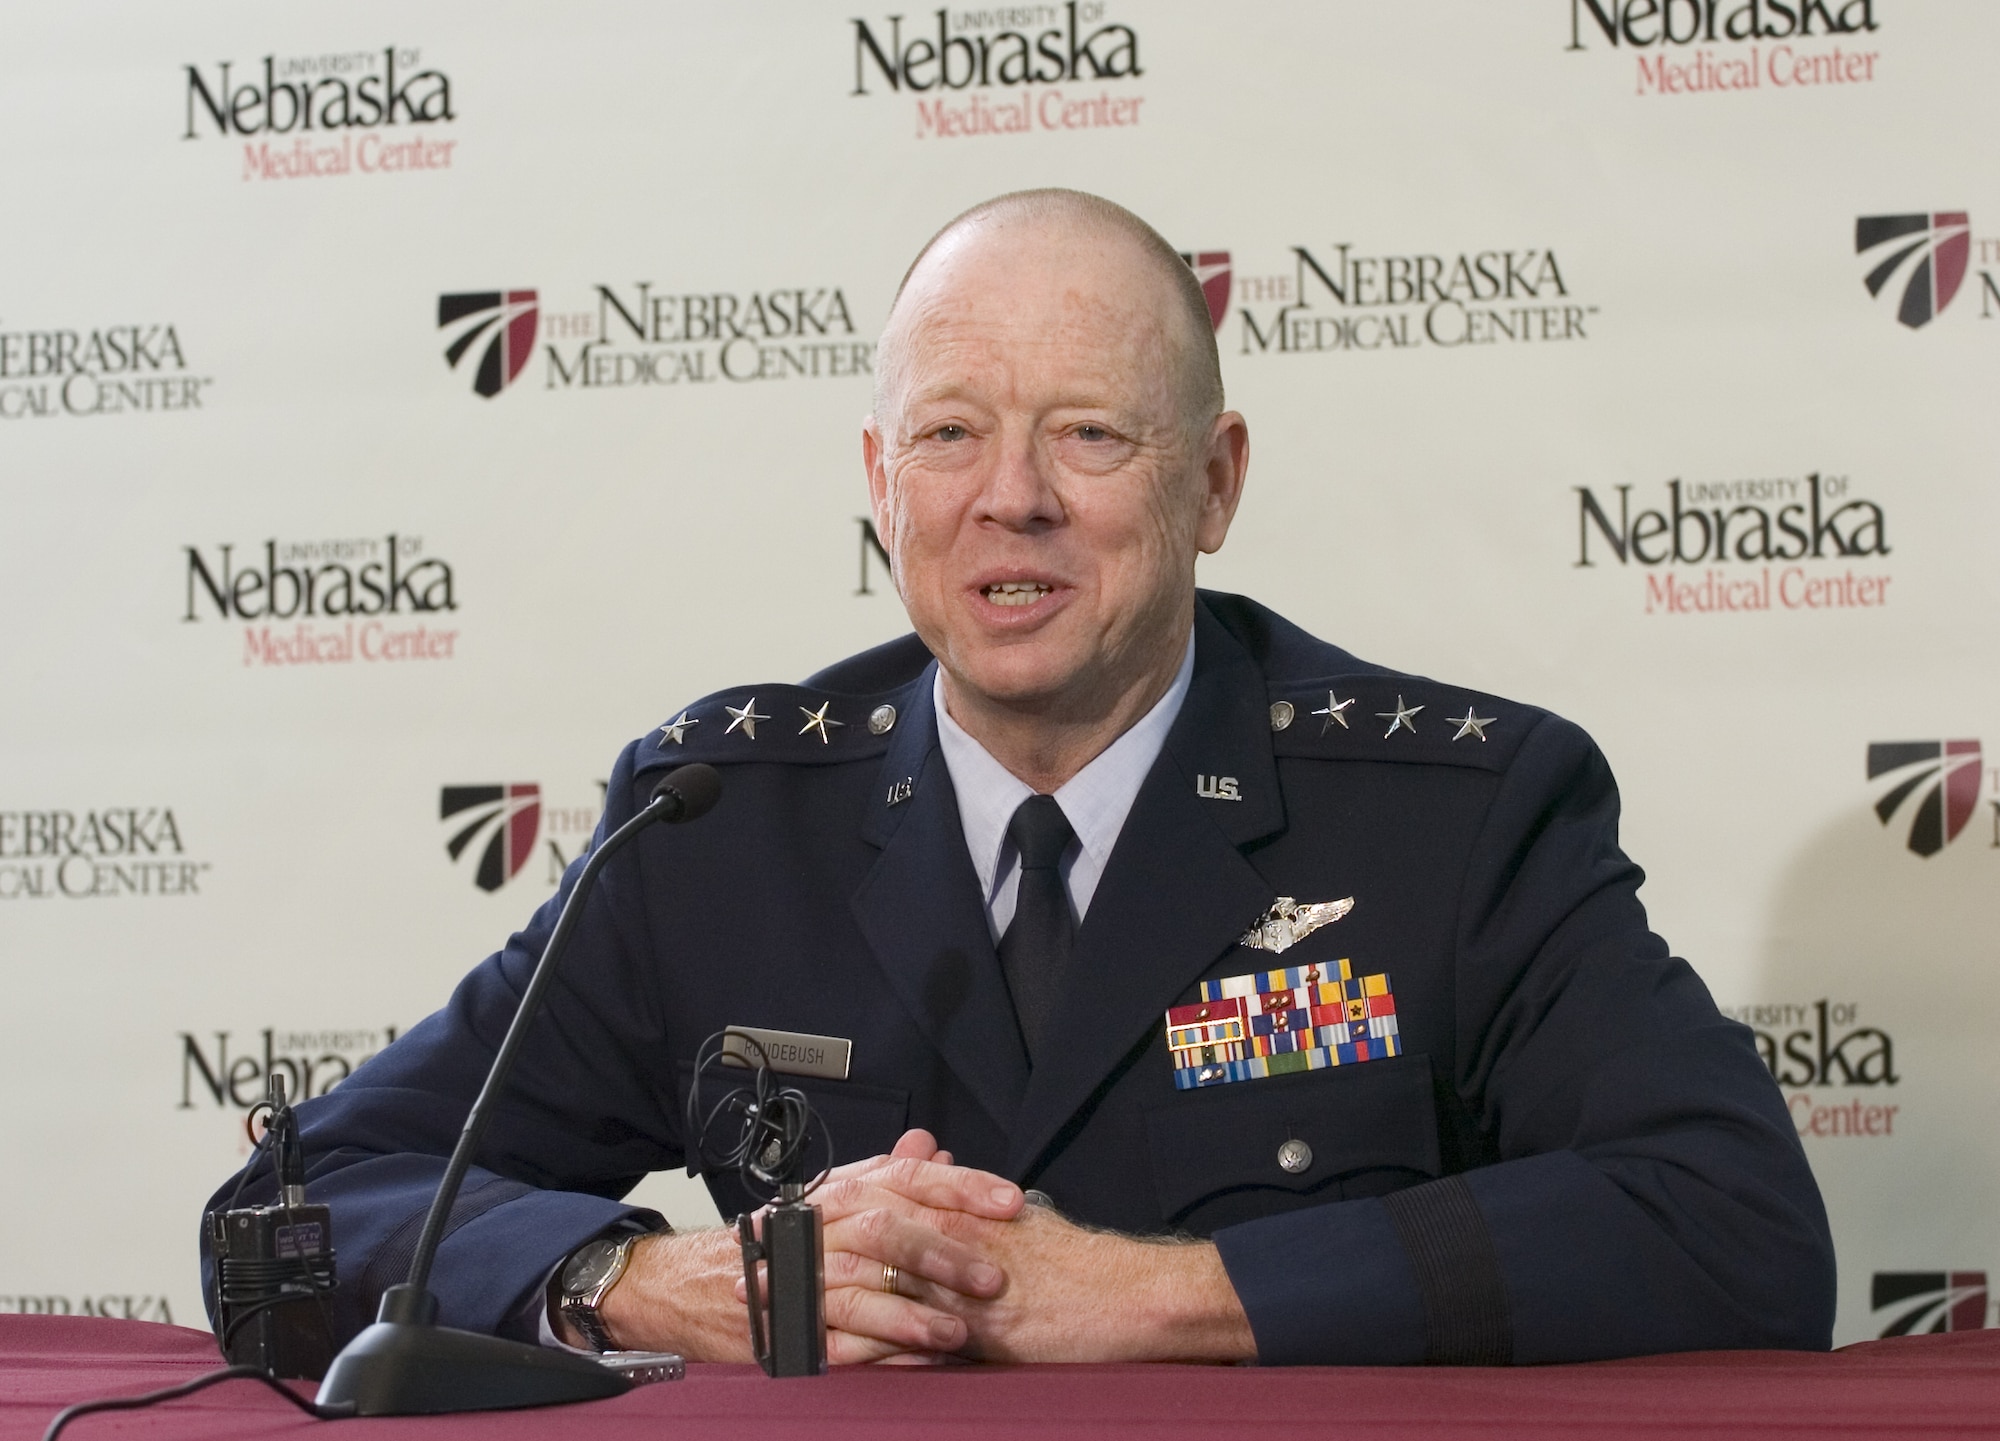 Lt. Gen. (Dr.) James G. Roudebush talks with news media representative during a visit to his alma mater, the University of Nebraska Medical Center College of Medicine, Aug. 13 in Omaha Neb. General Roudebush is the Air Force surgeon general.  (U.S. Air Force photo/Lance Cheung)